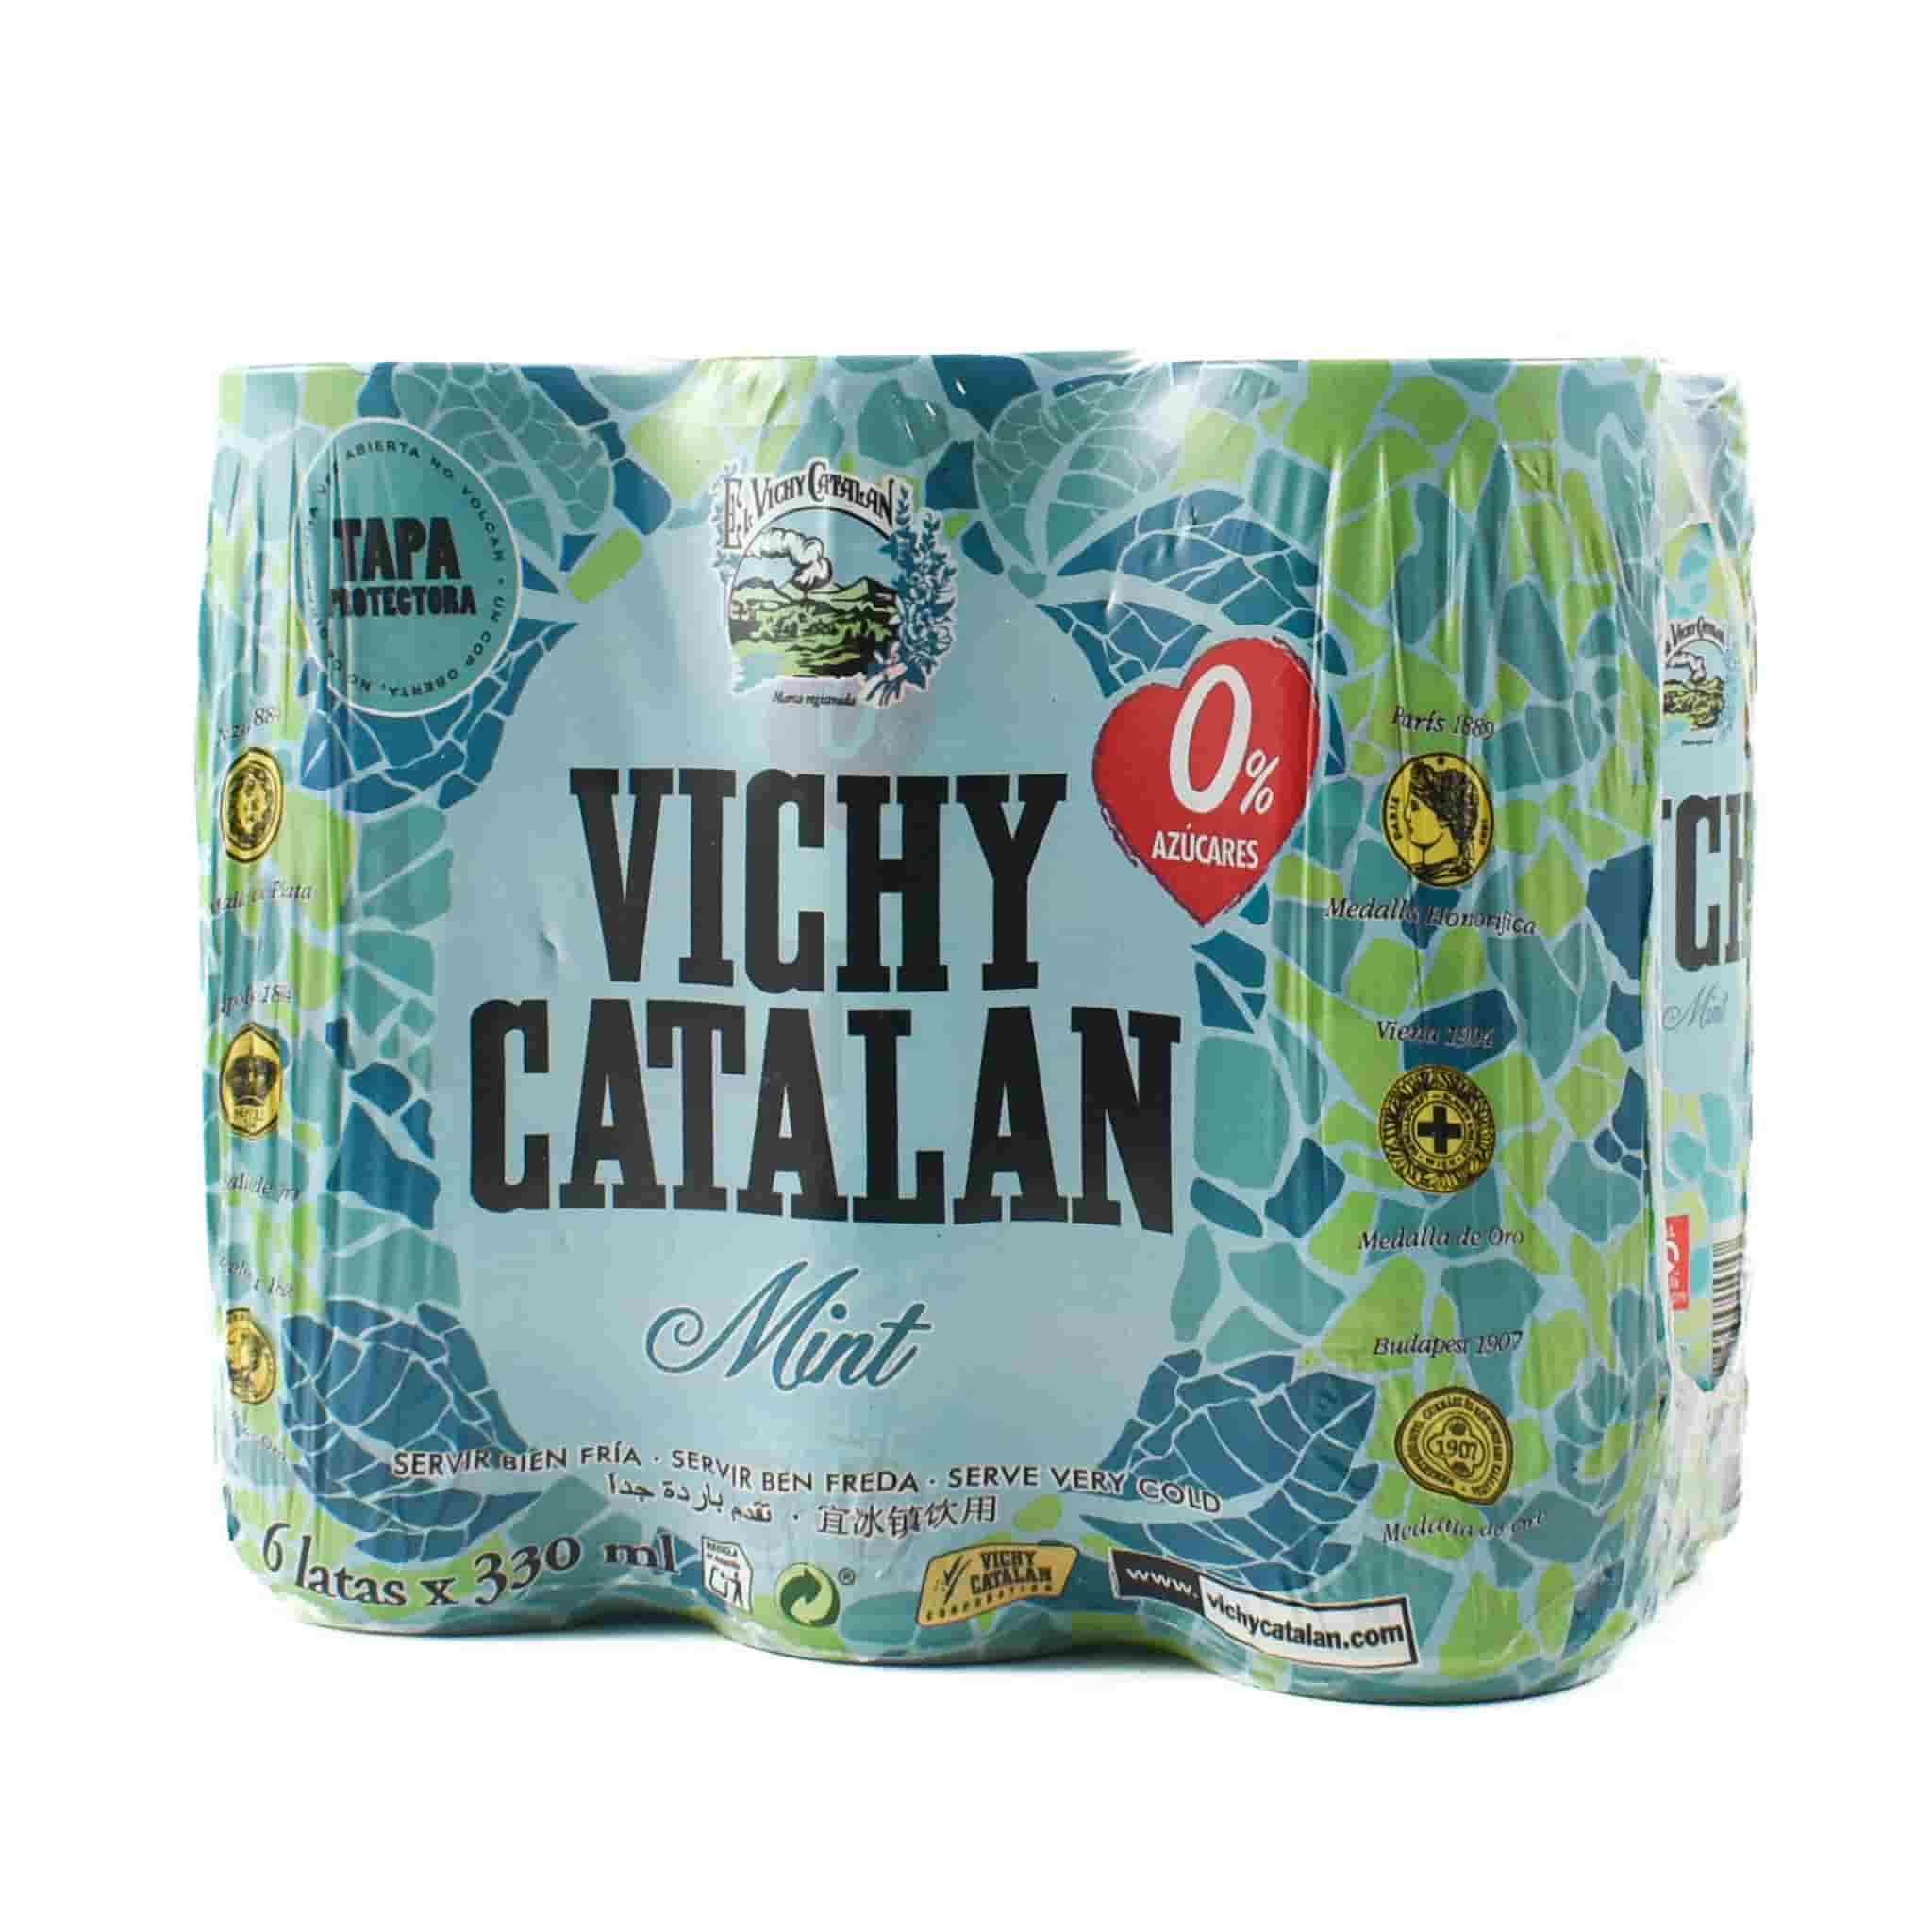 6x Vichy Catalan Sparkling Mint Mineral Water, 330ml